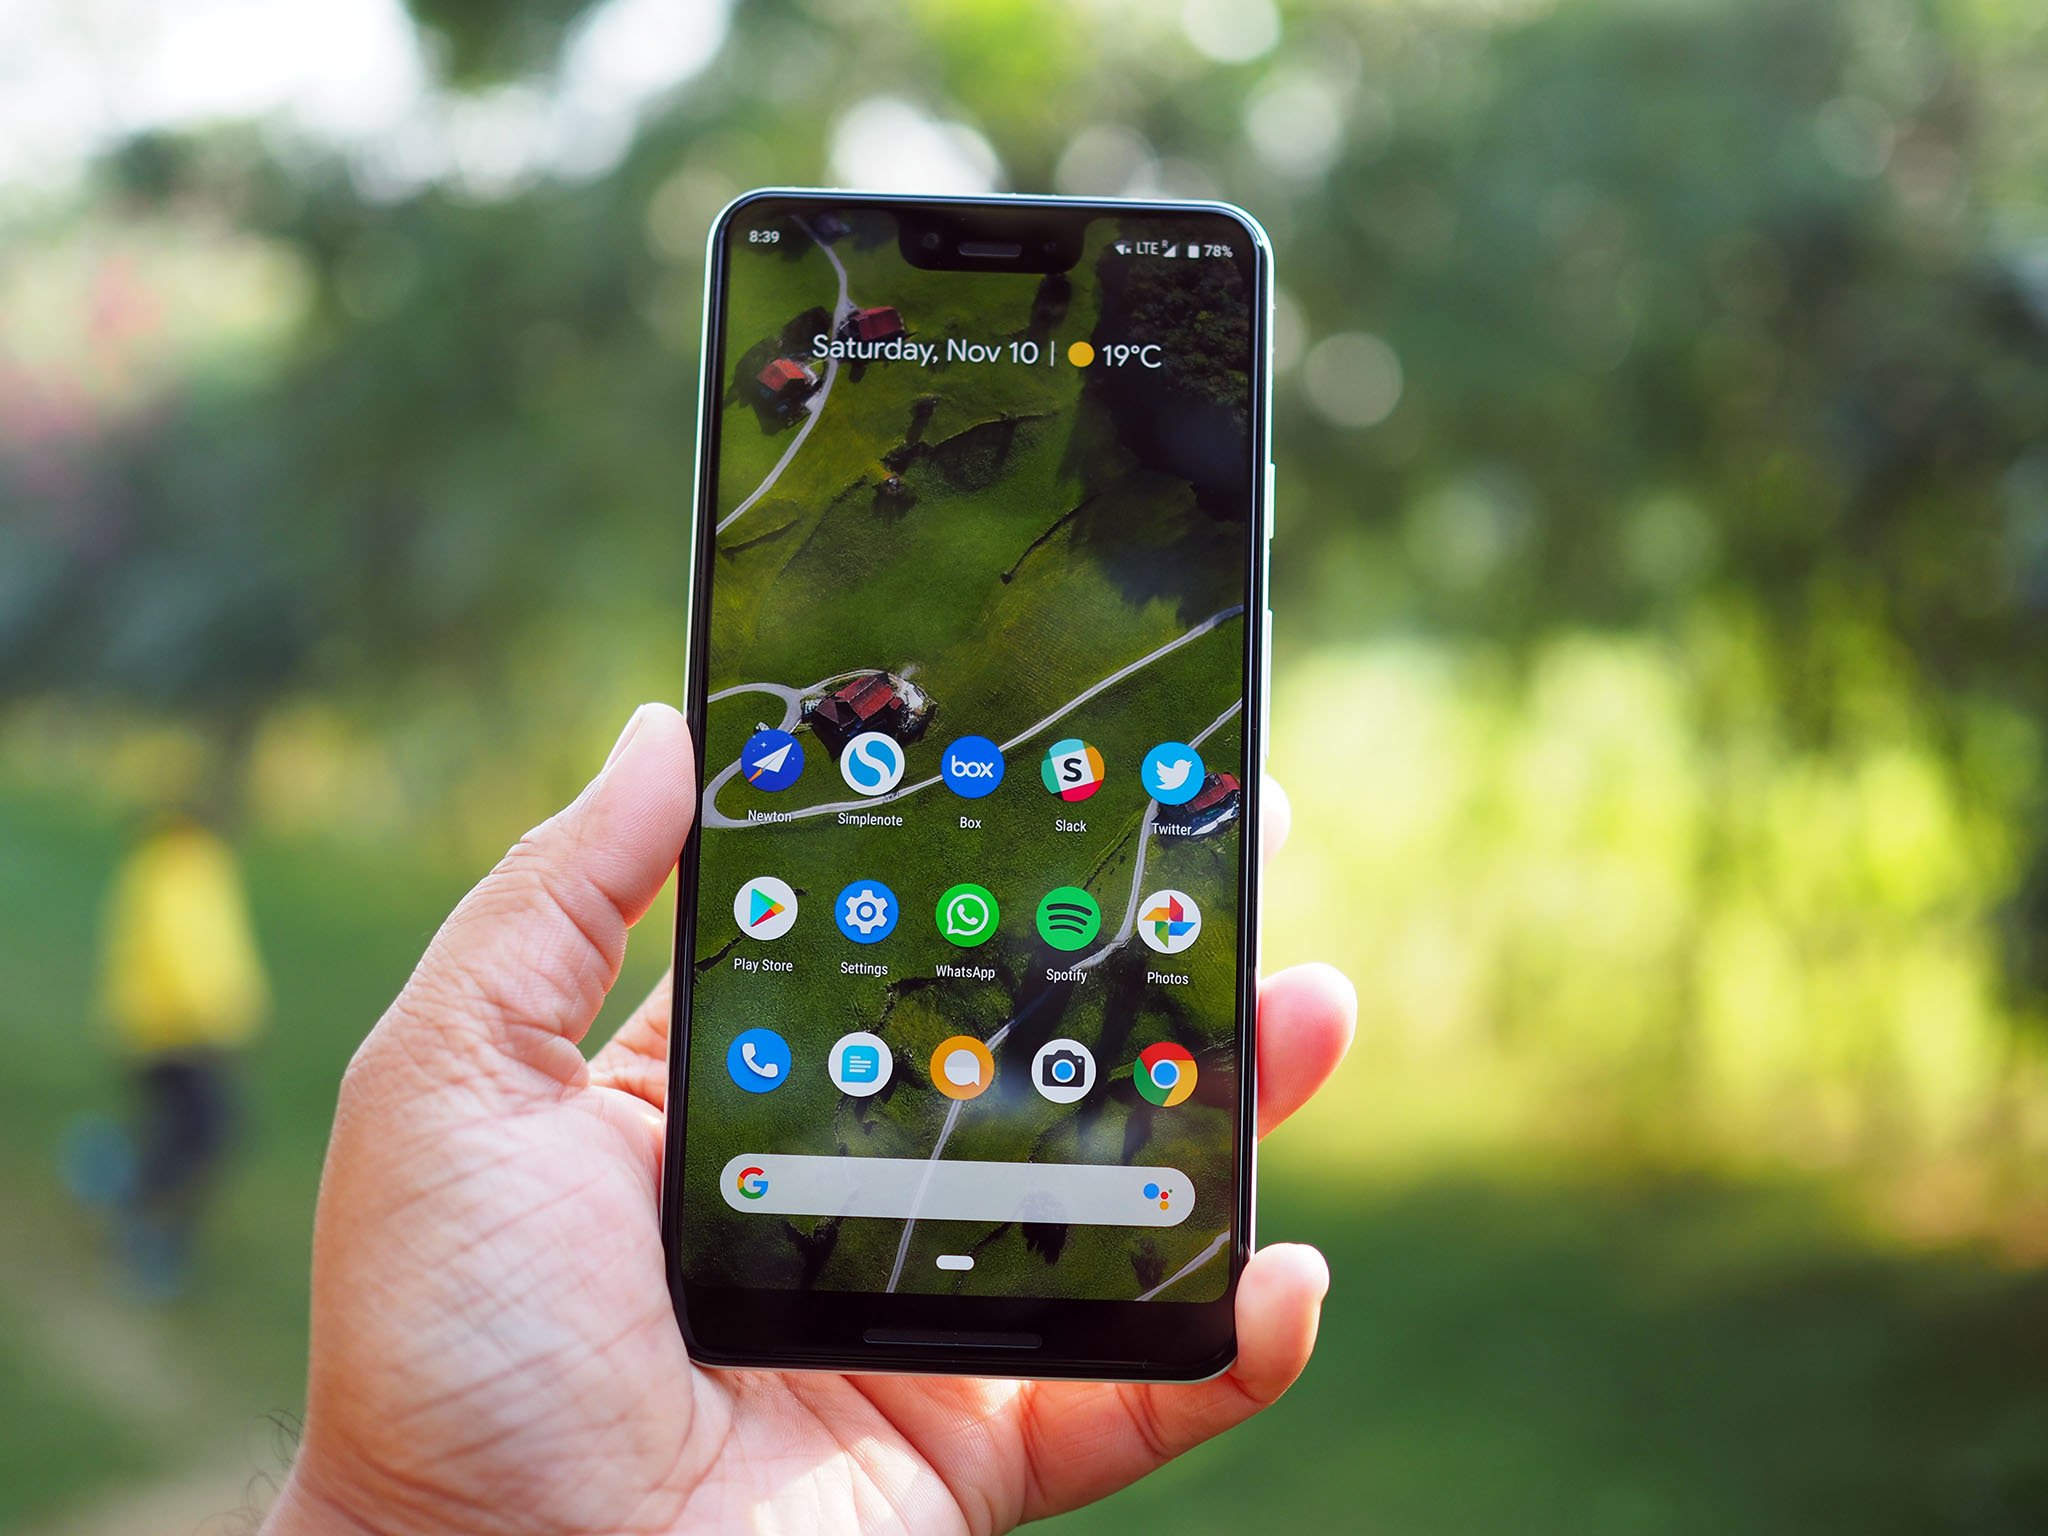 How To Take A Screenshot On The Google Pixel 3 Android Central